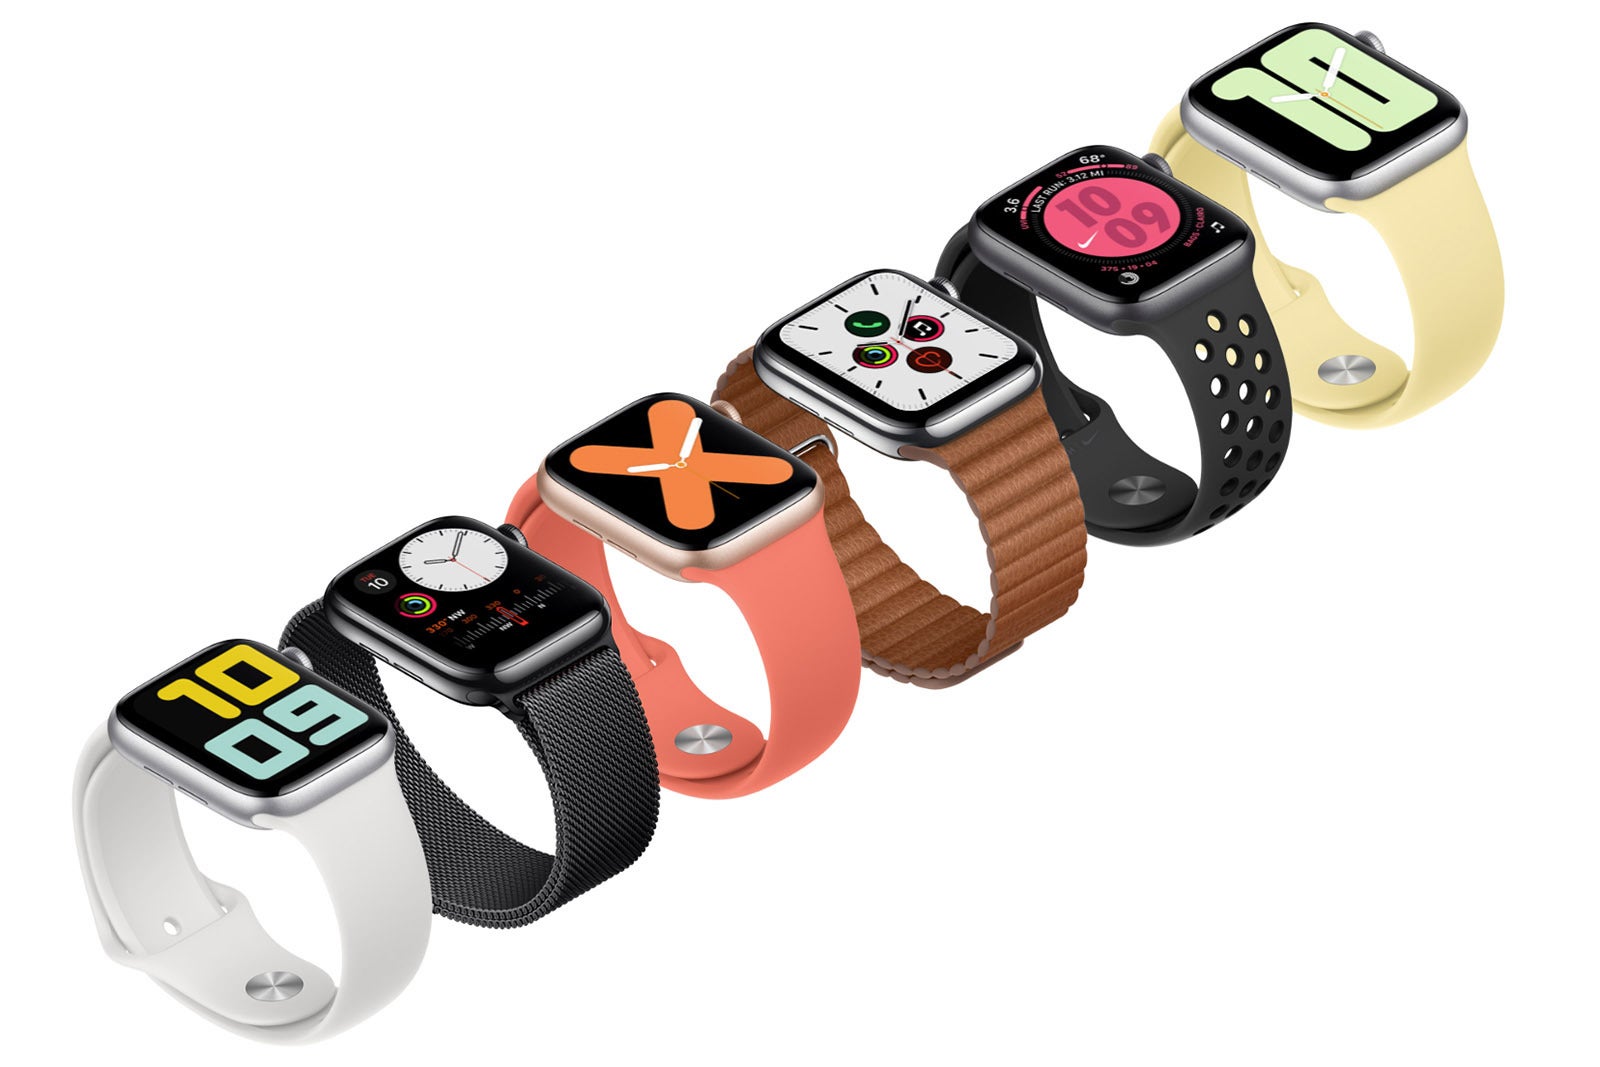 Watchfaces have a grayed out always on version and upon a tap or a flick of the wrist turn colorful - Apple Watch Series 5 is official: Always-On screen, Compass, $400 starting price